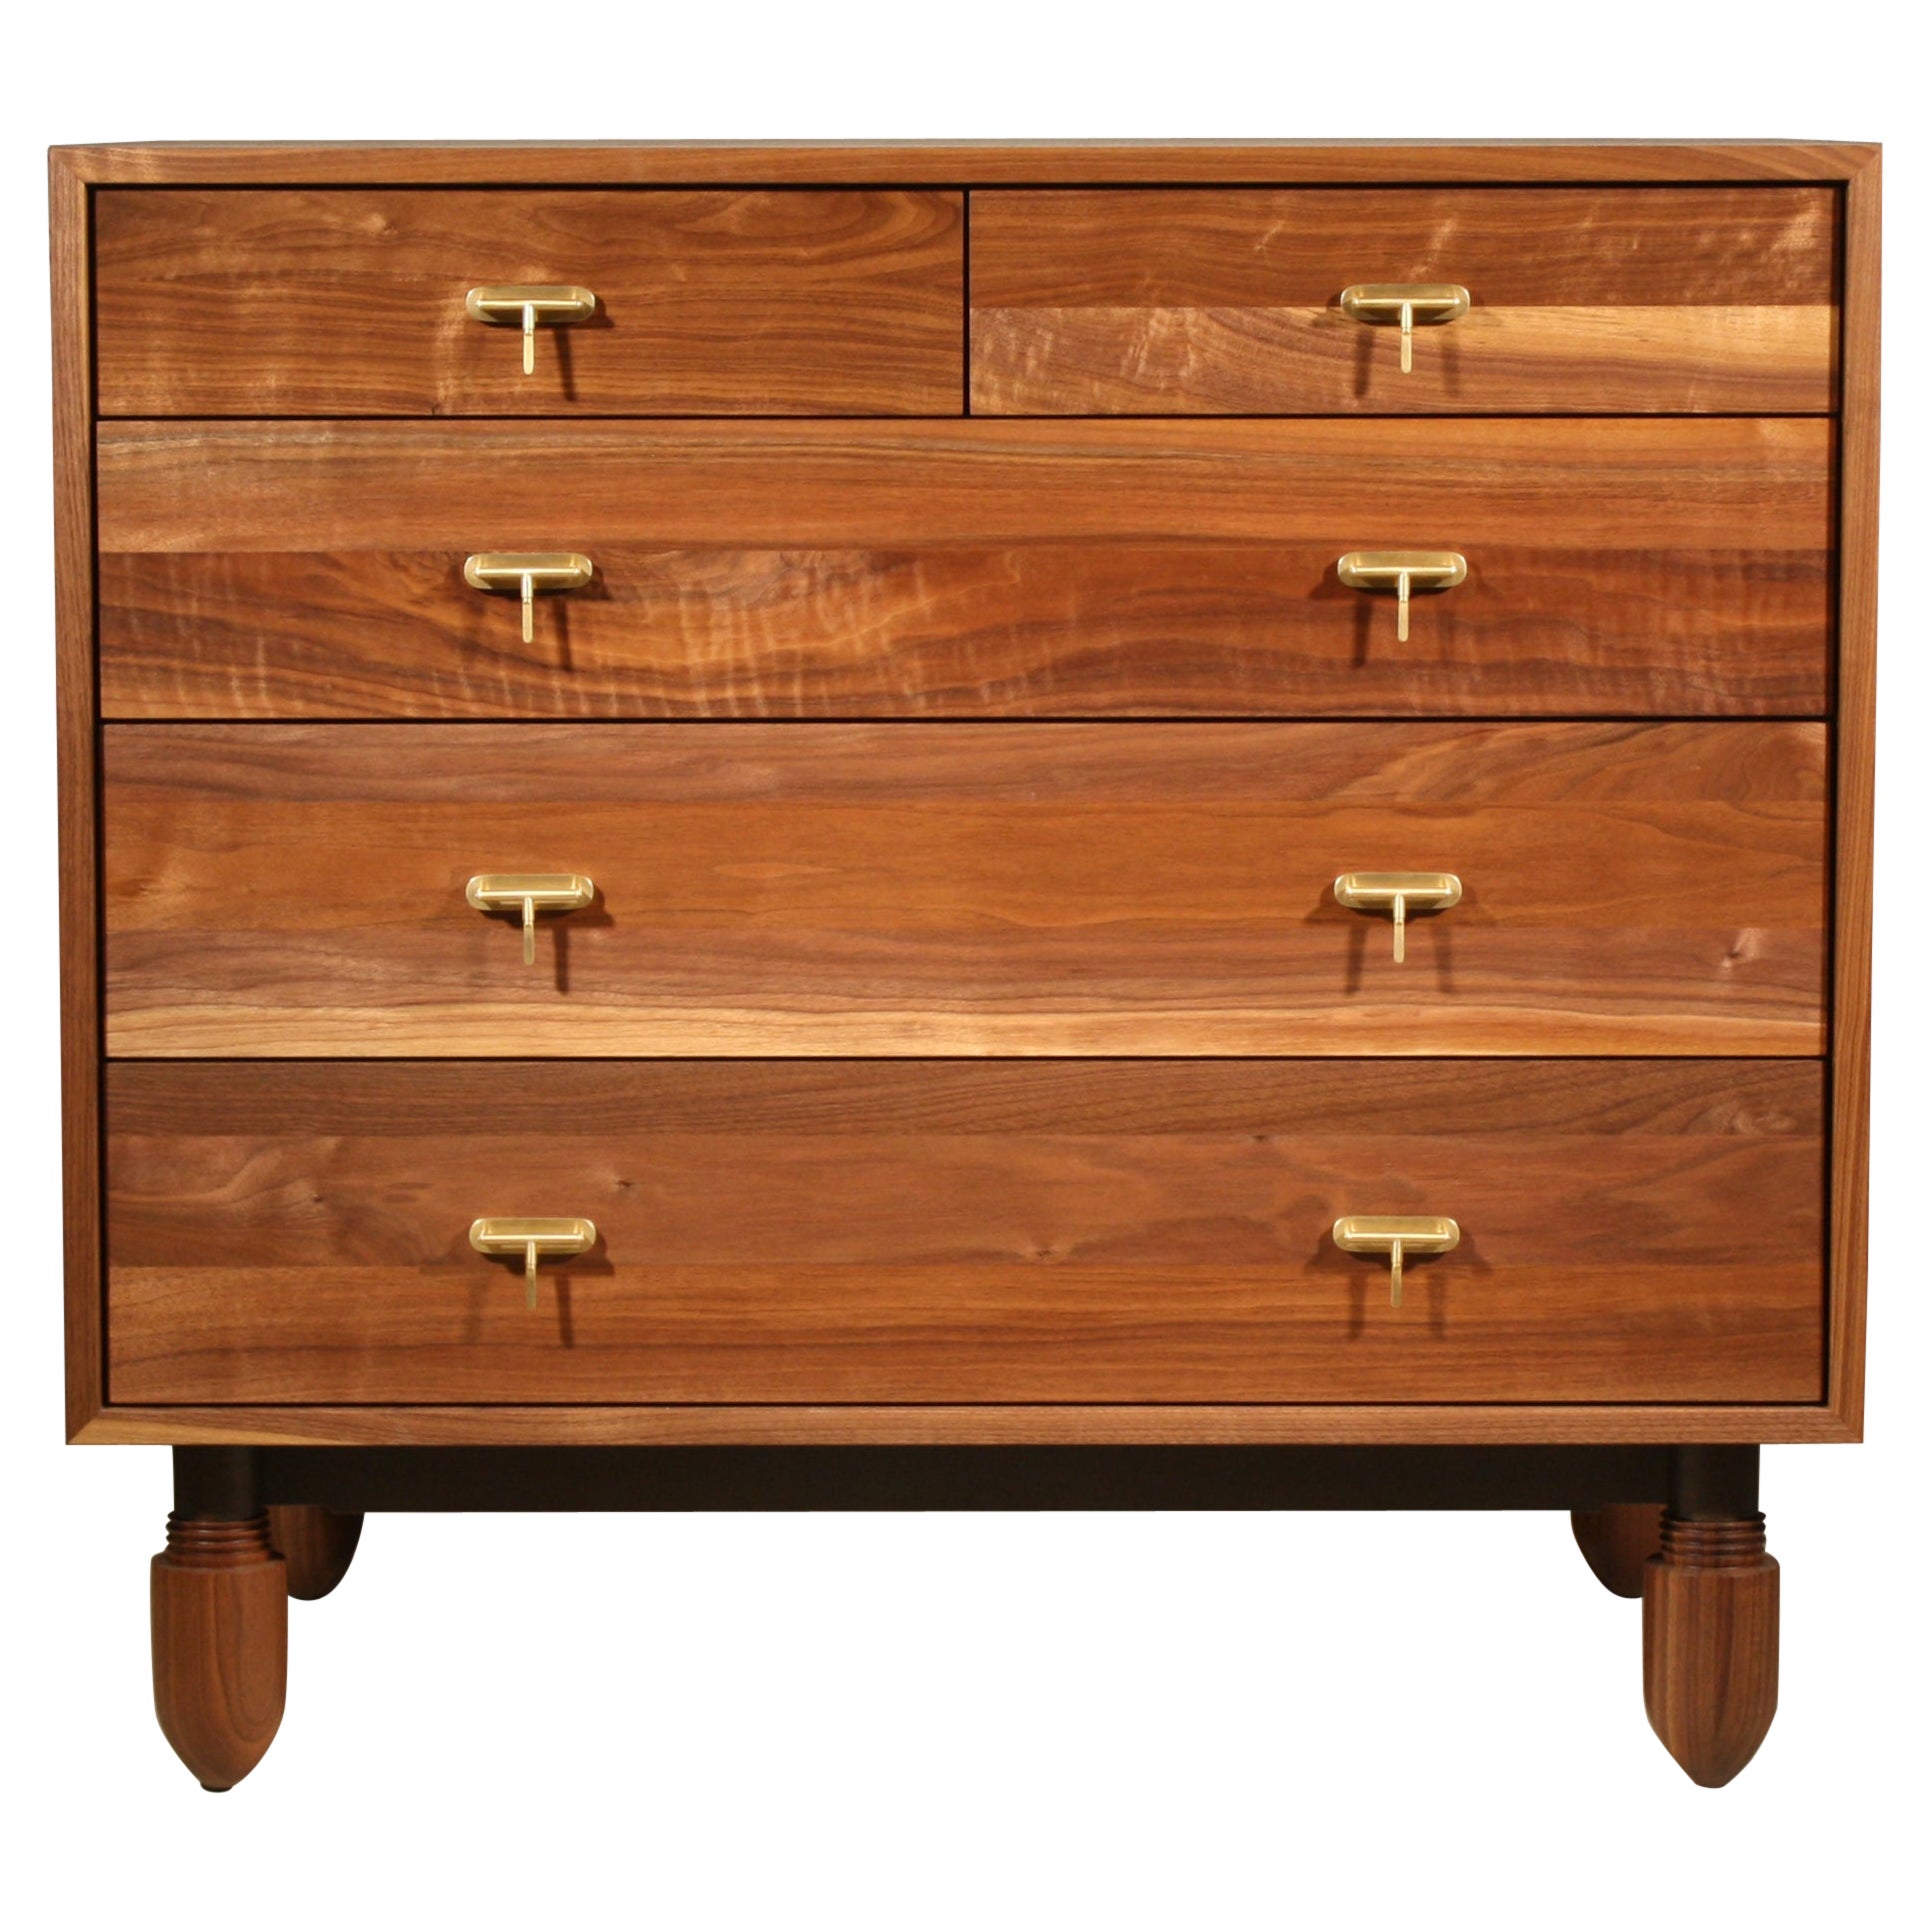 Basilica Dresser by Laylo Studio in Solid Wood, Blackened Steel, and Brass For Sale